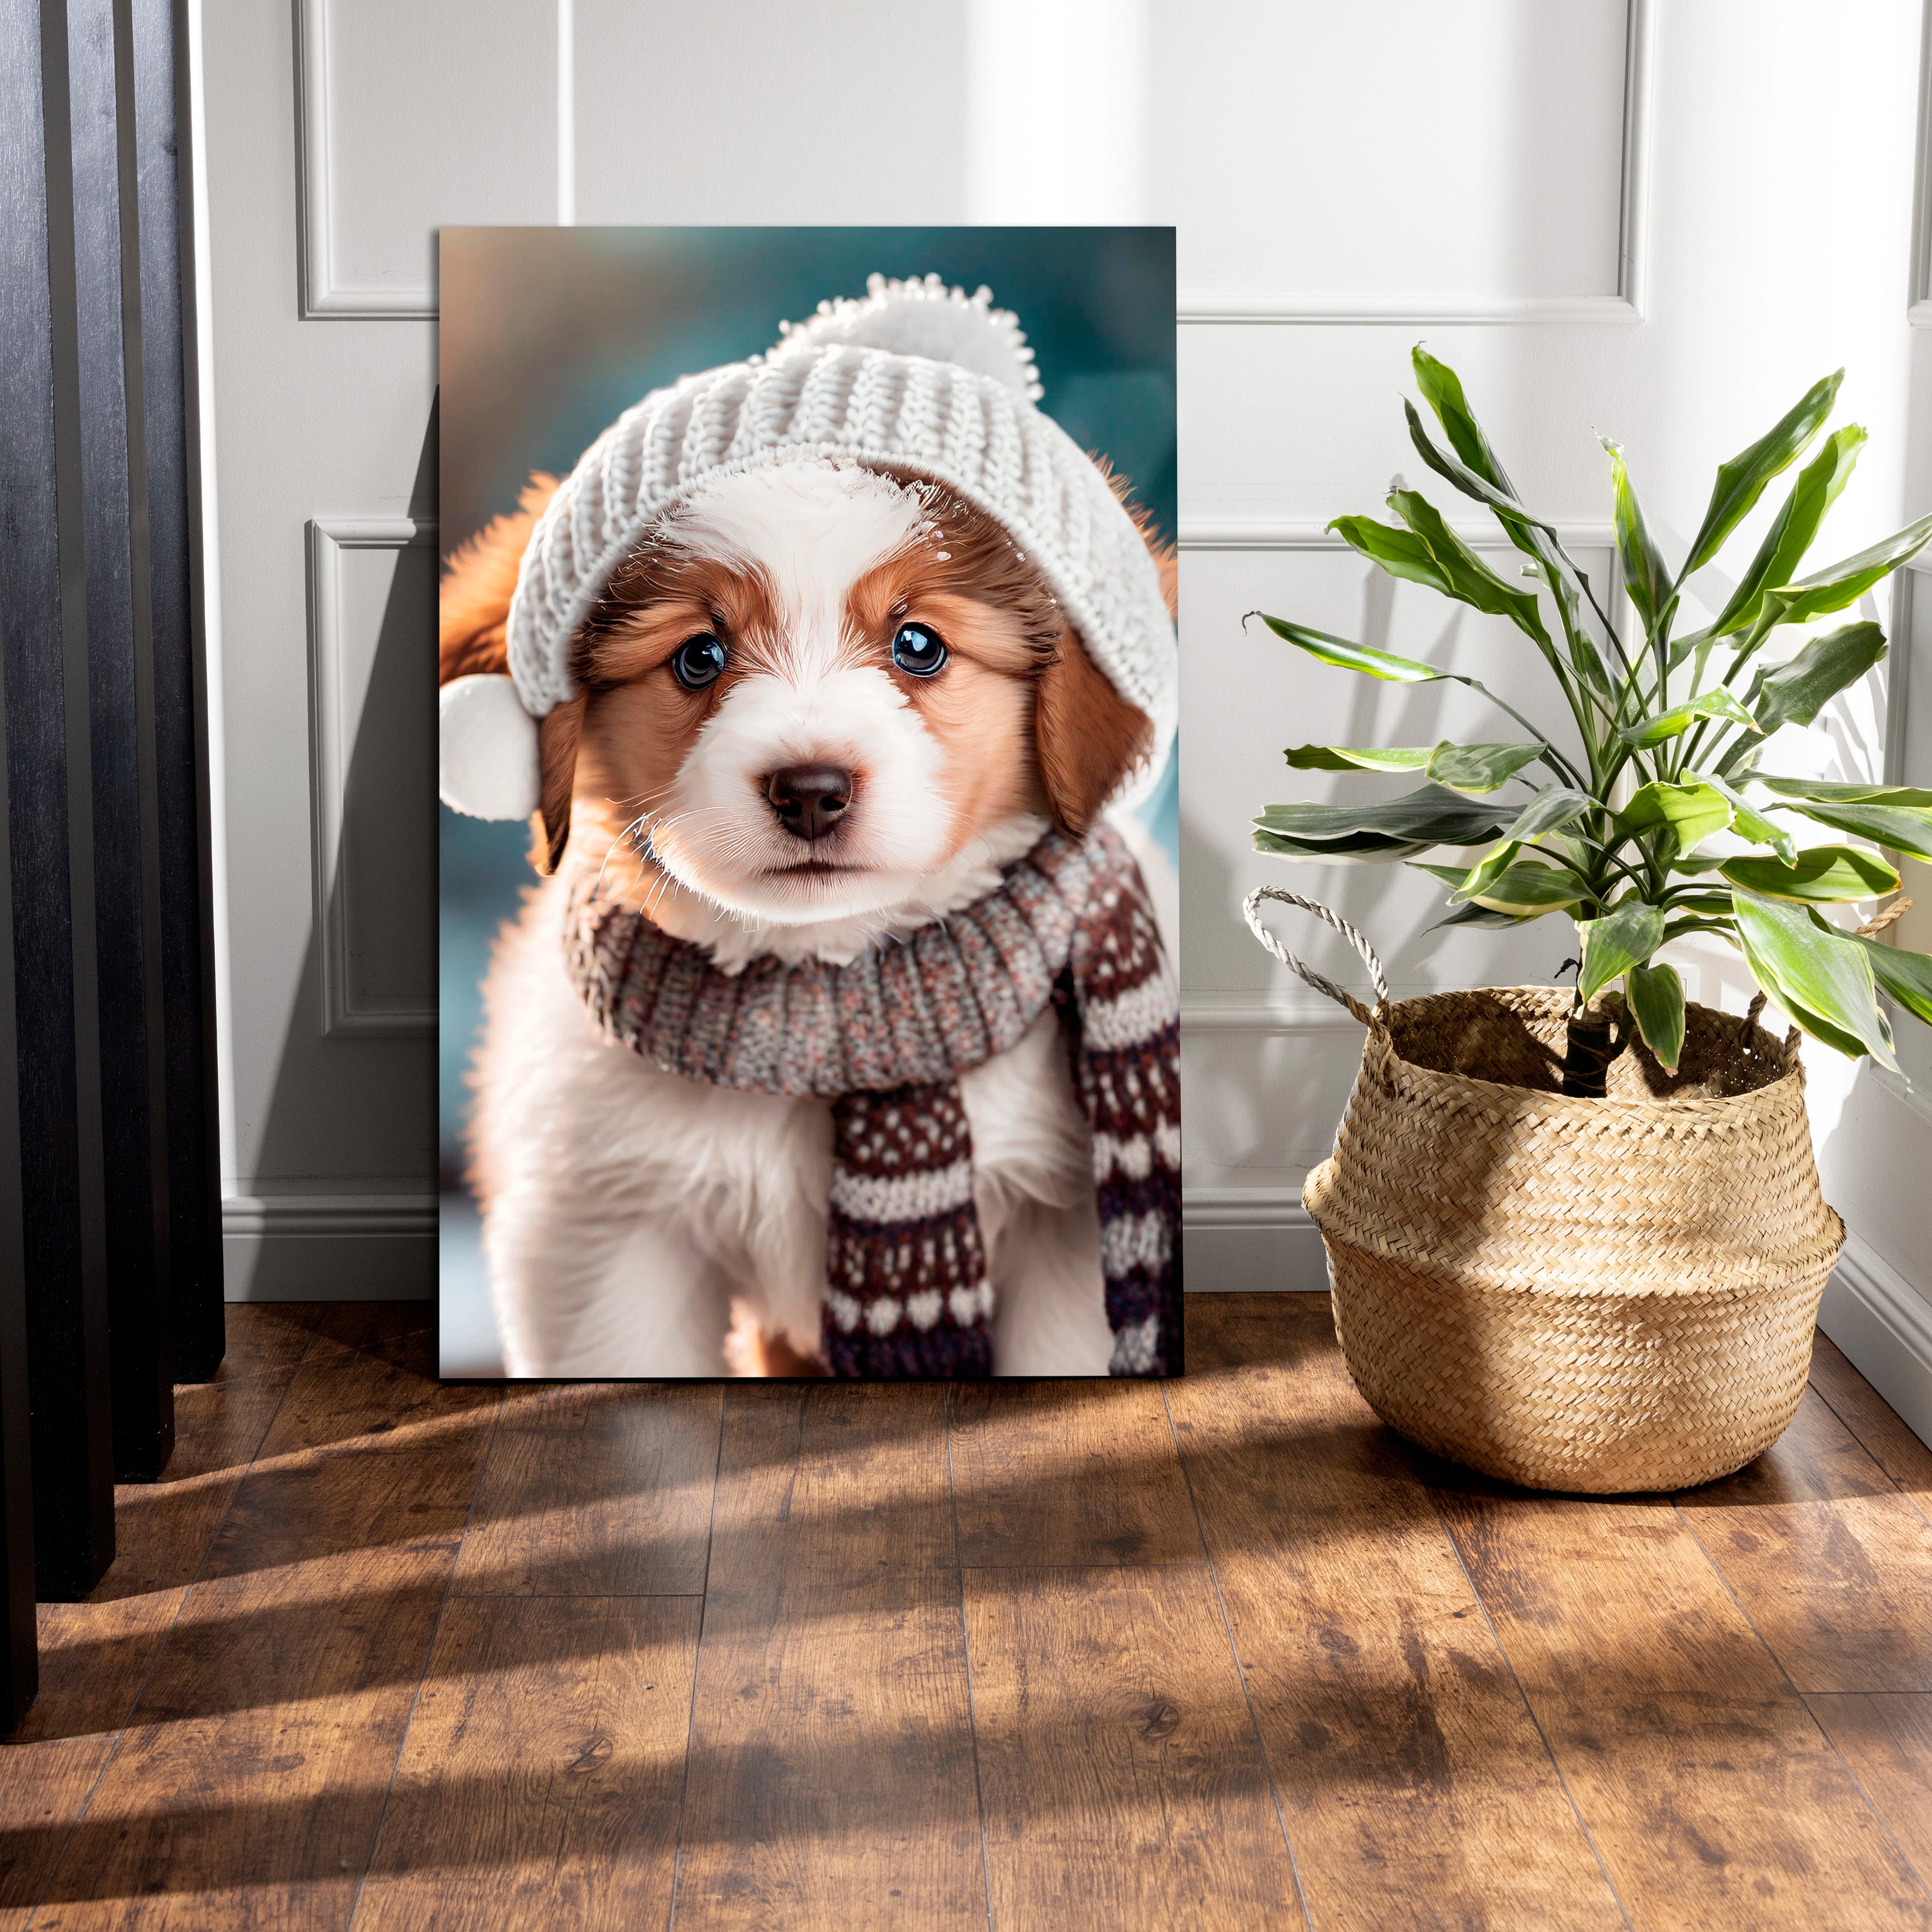 Cute Puppy Wearing a White Winter Hat, Sweater and Scarf